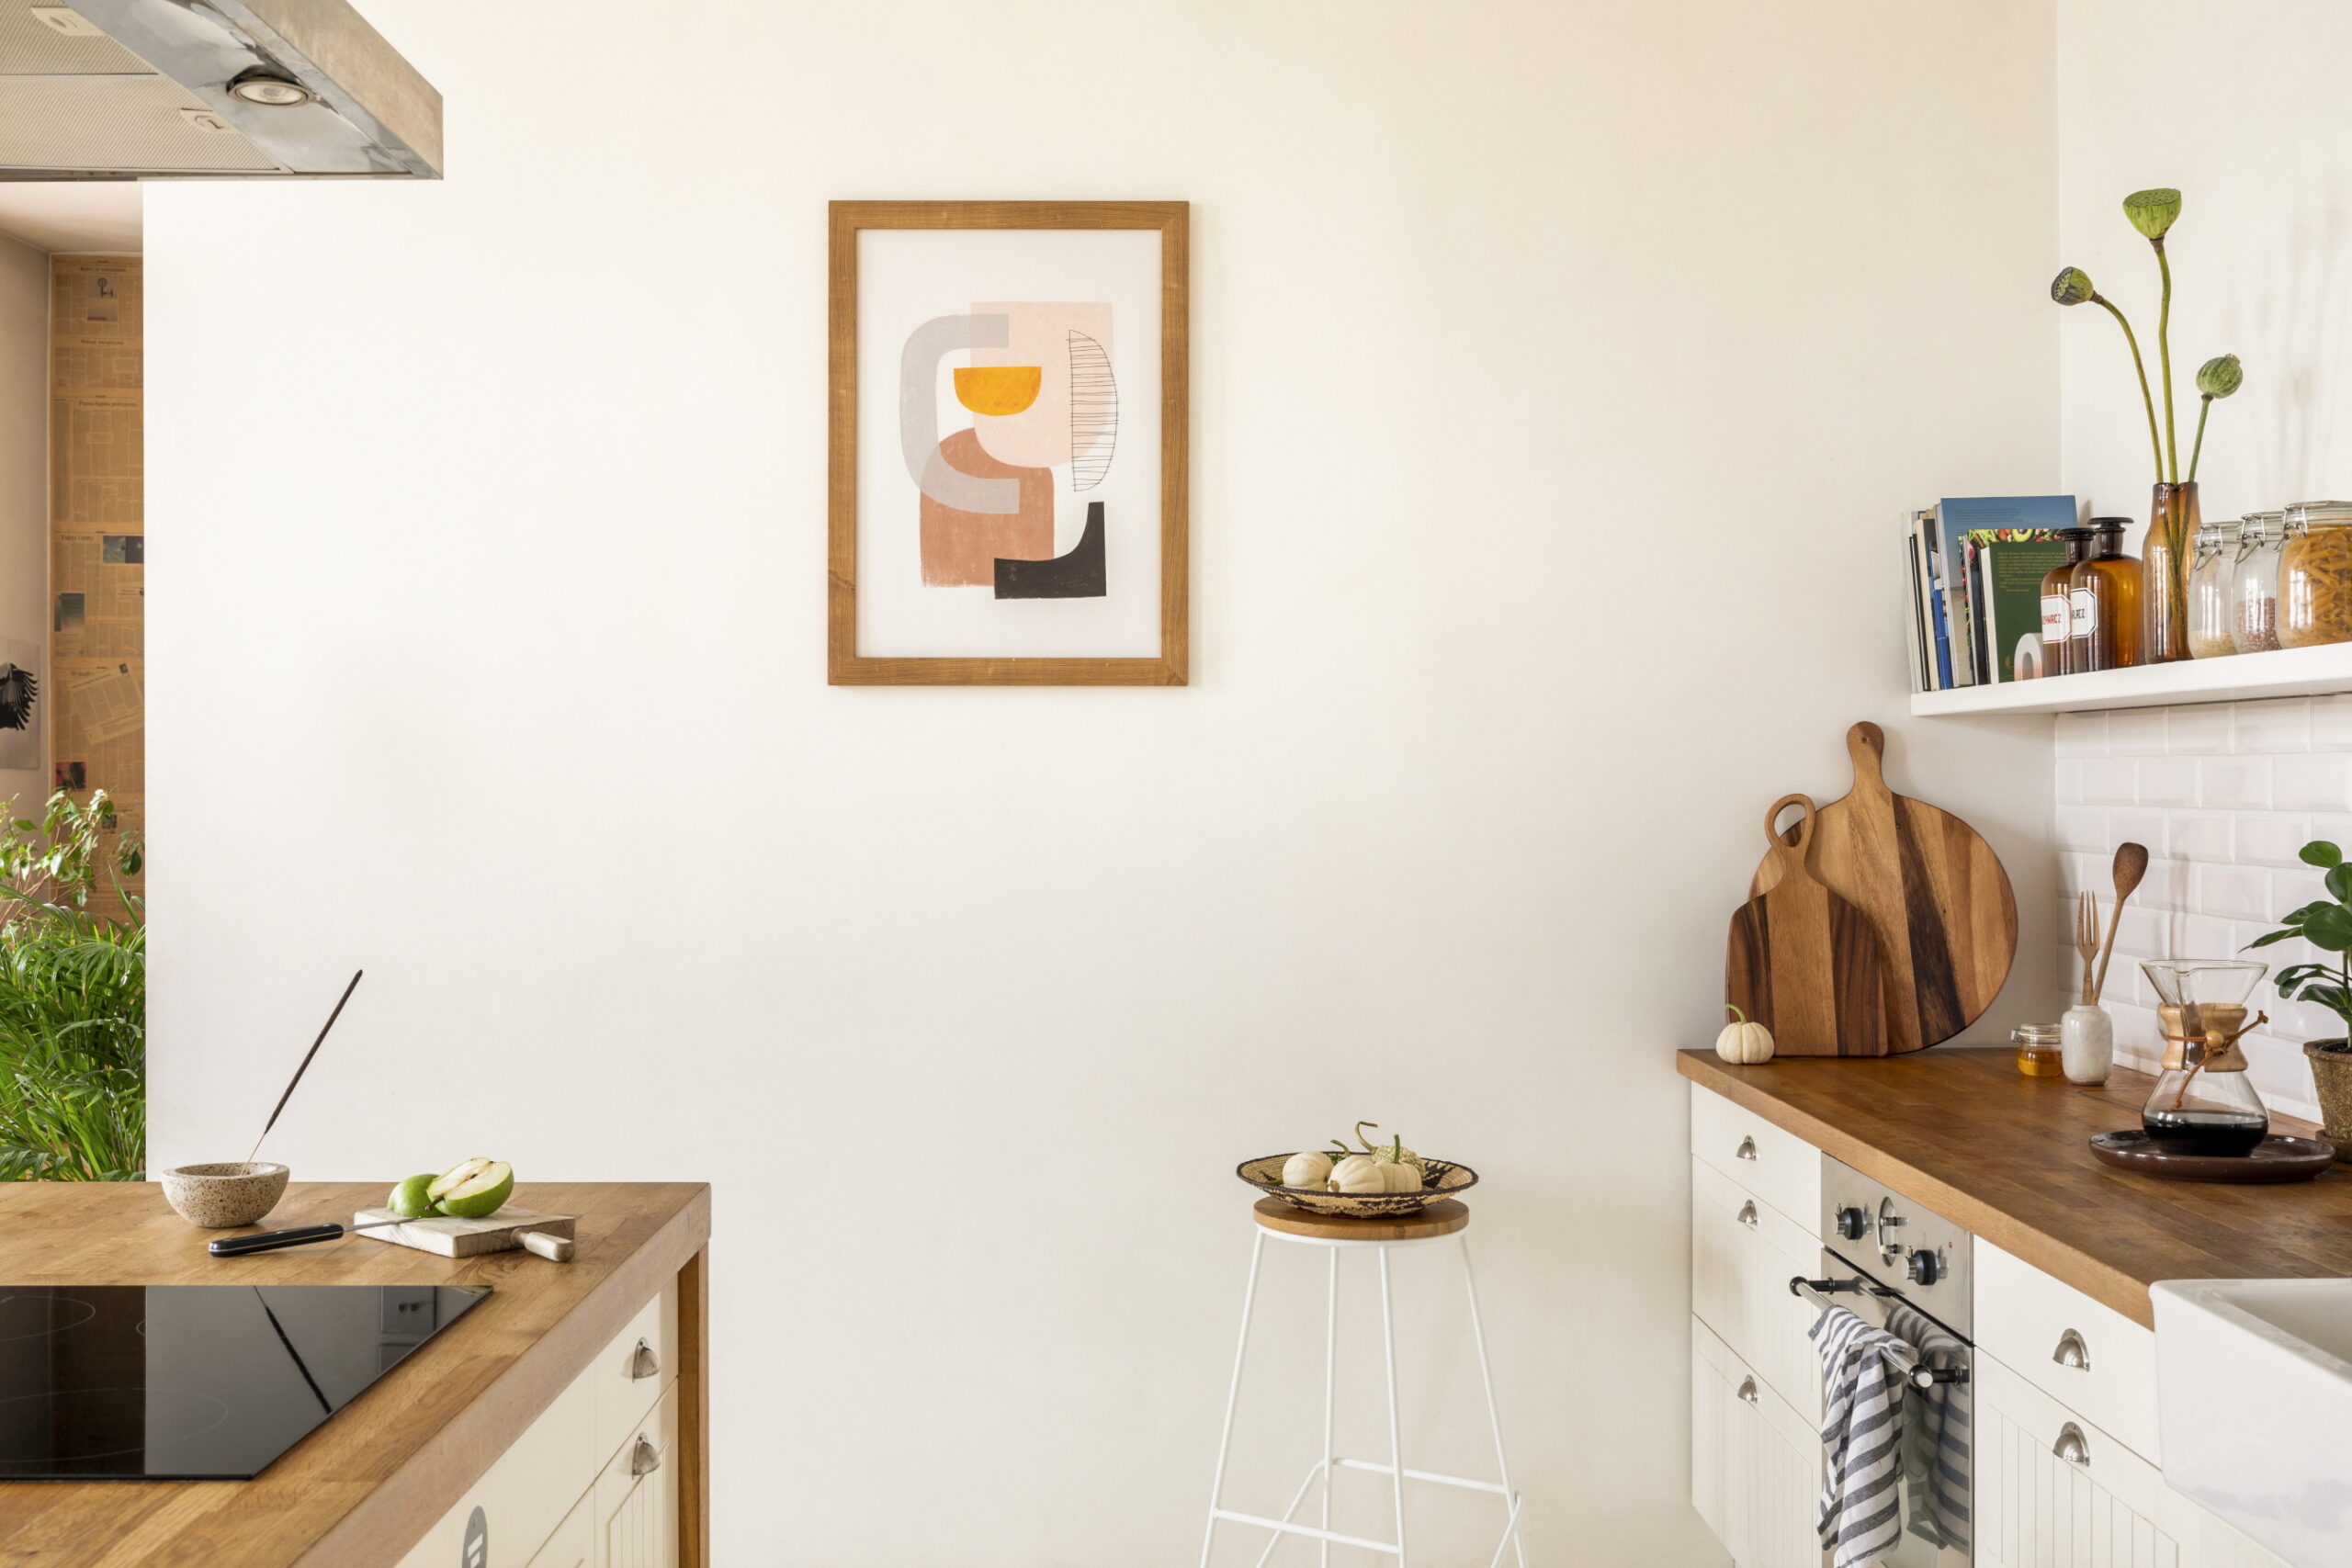 Personalize your kitchen by hanging artwork on the walls to reflect your personality.